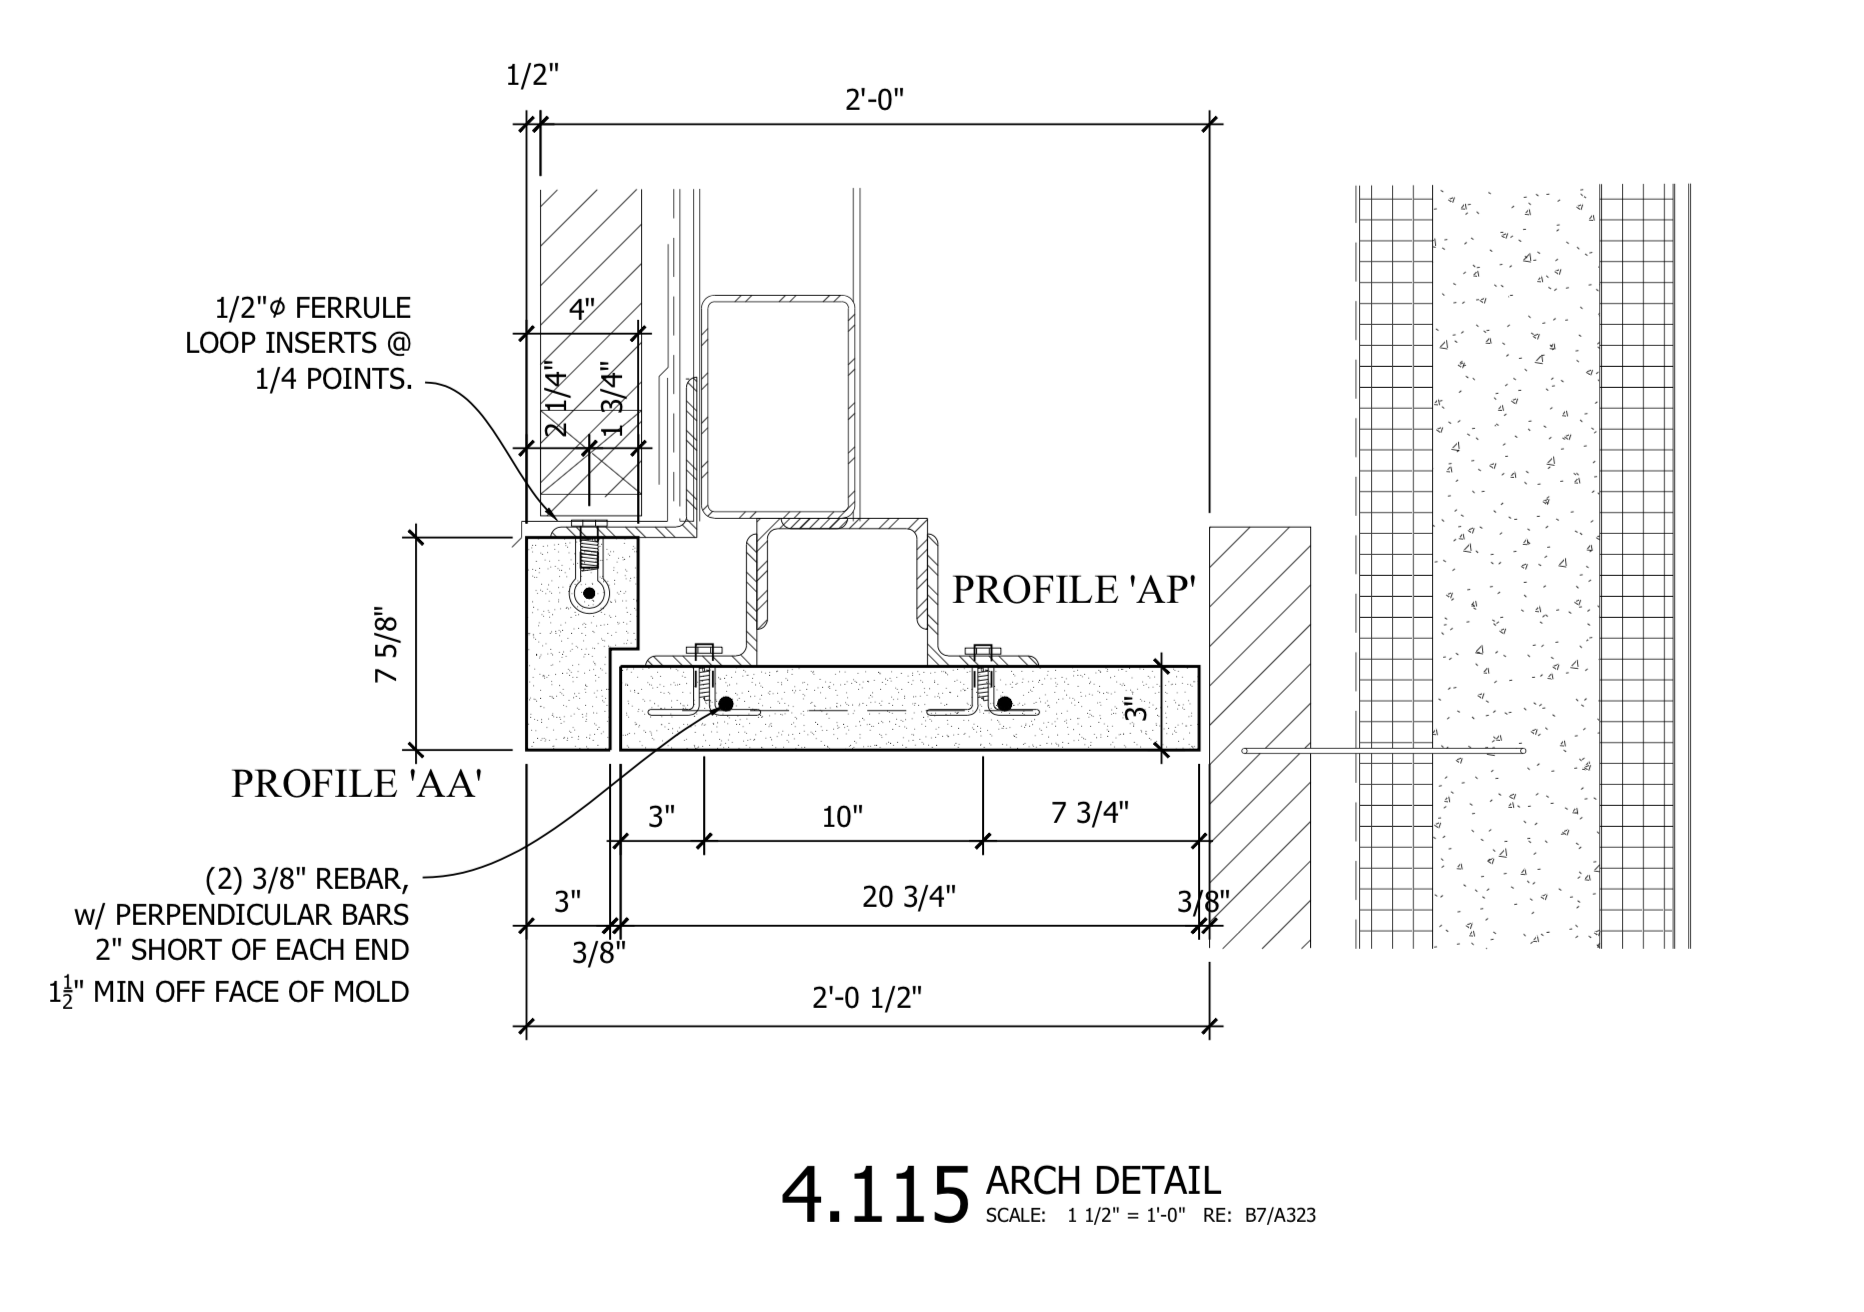 Section 4.115 - Connection Details for Suspended Soffit of Archway